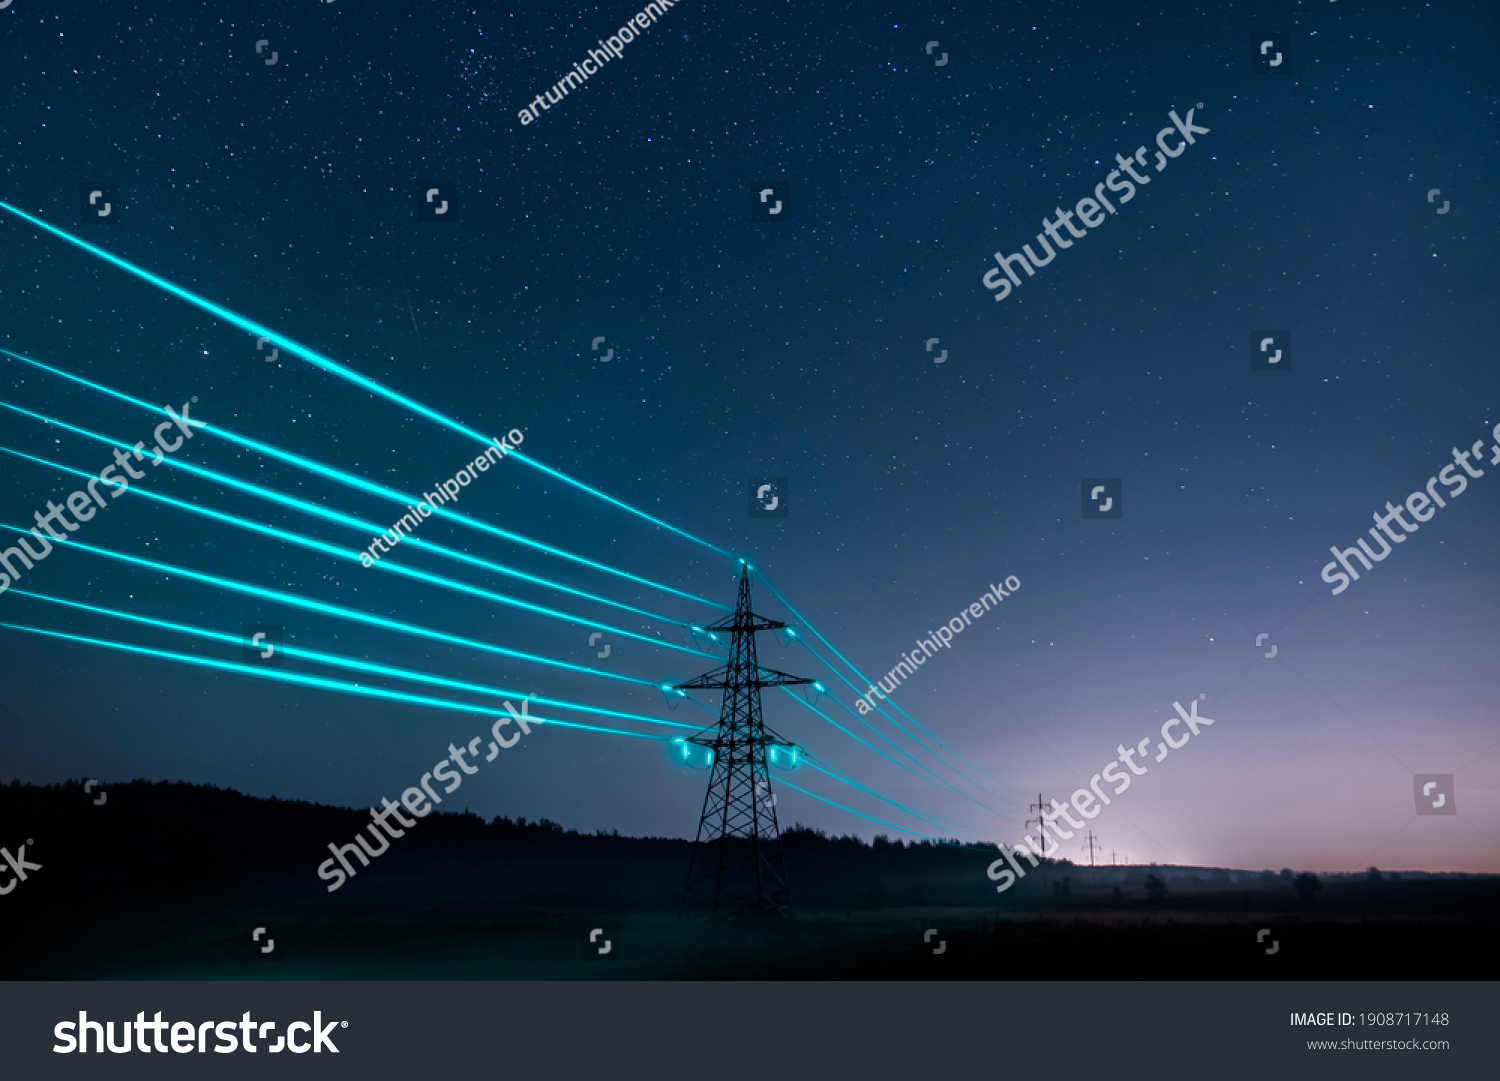 Electricity transmission towers with glowing wires against the starry sky. Energy concept. #1908717148